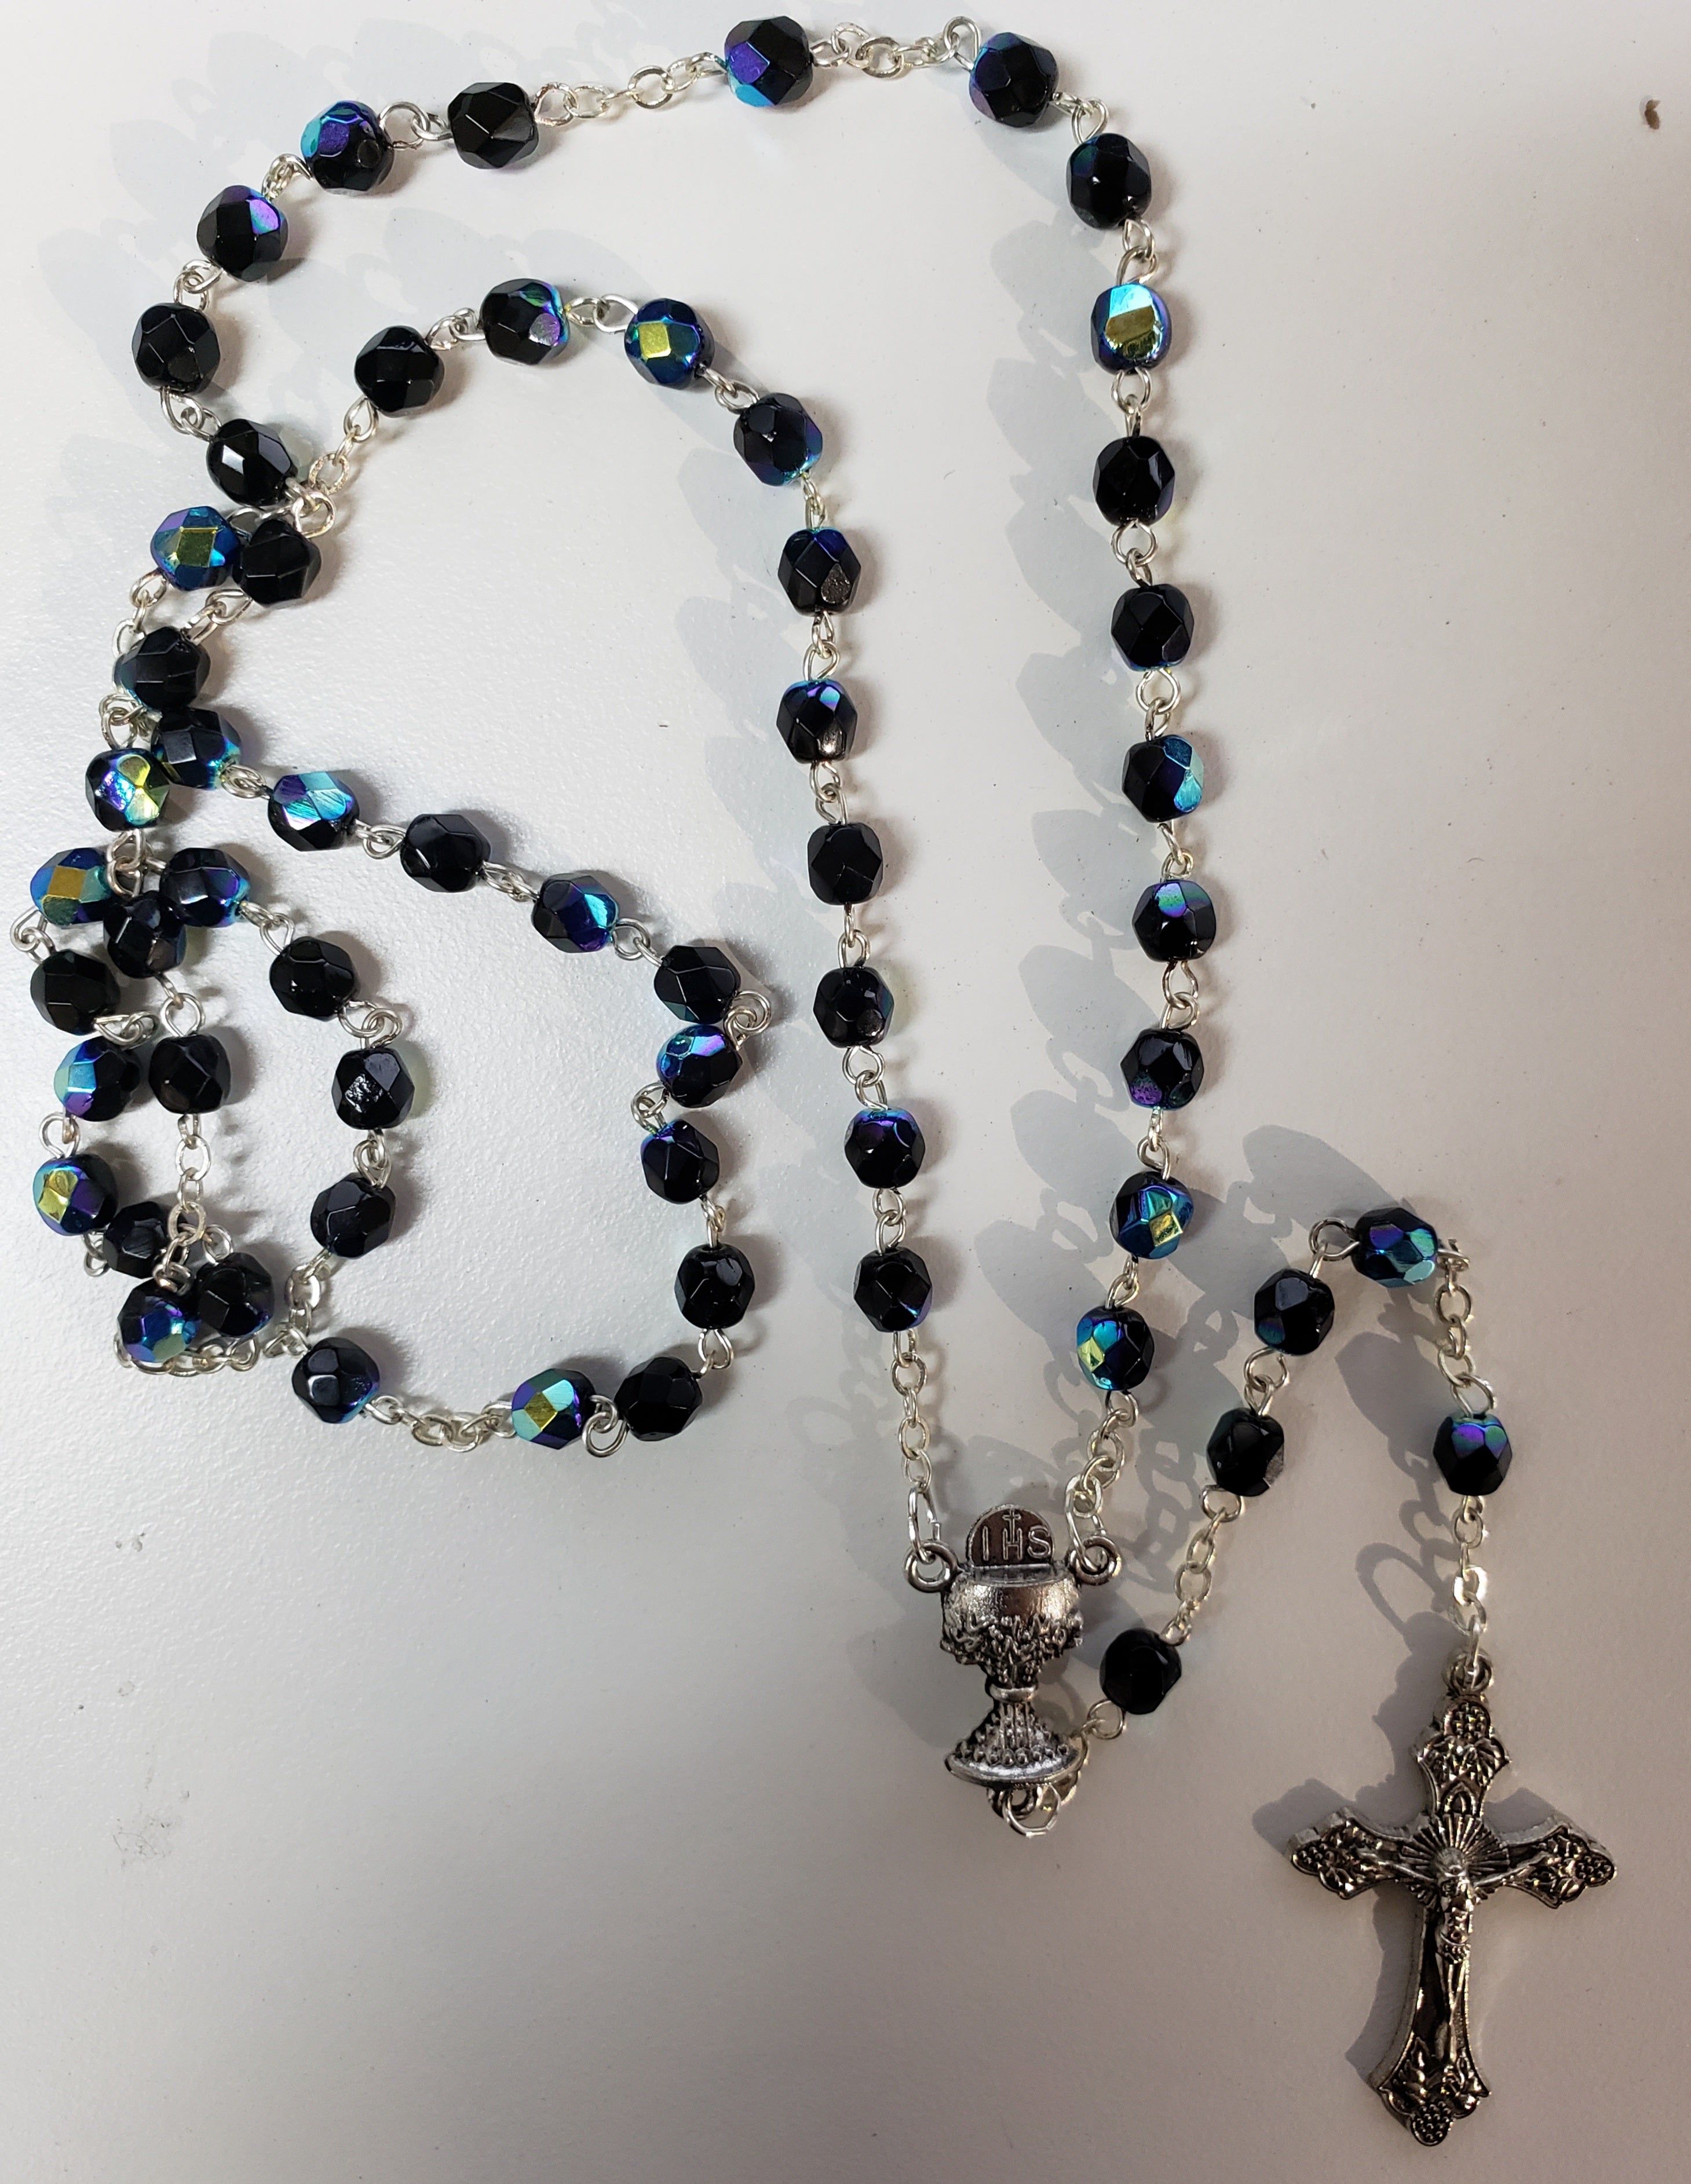 5mm Jet Aurora Borealis Crystal Bead Communion Rosary with Crucifix and Chalice Center